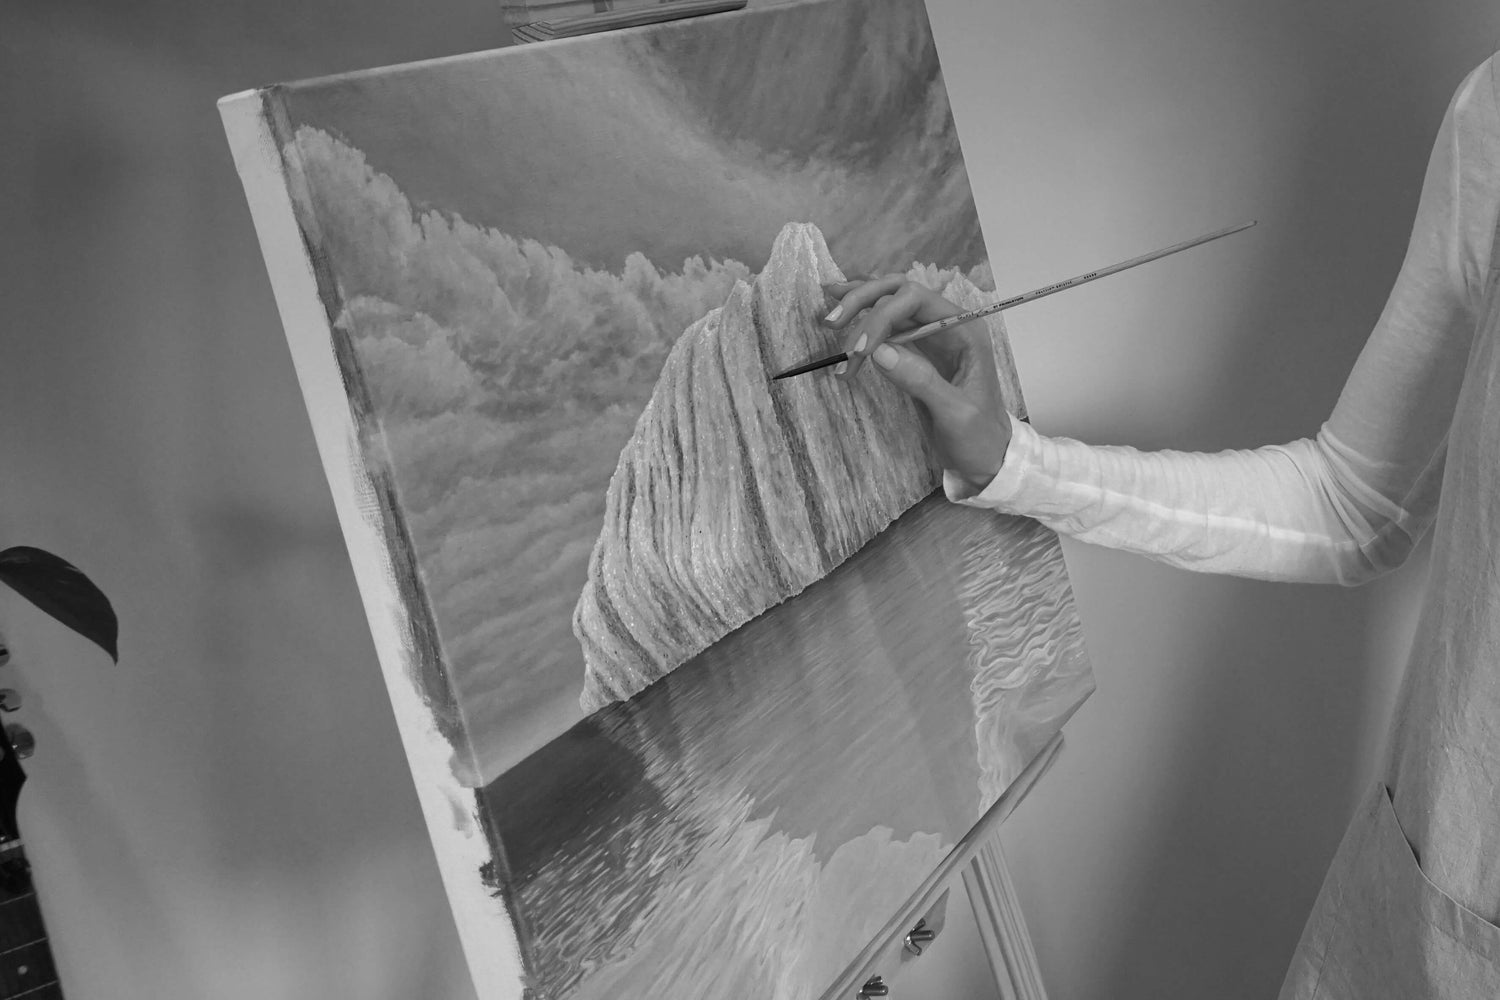 Australian artist, Hayley Byron, painting an iceberg in oil on linen. This image features the artist painting on the canvas with a paintbrush.